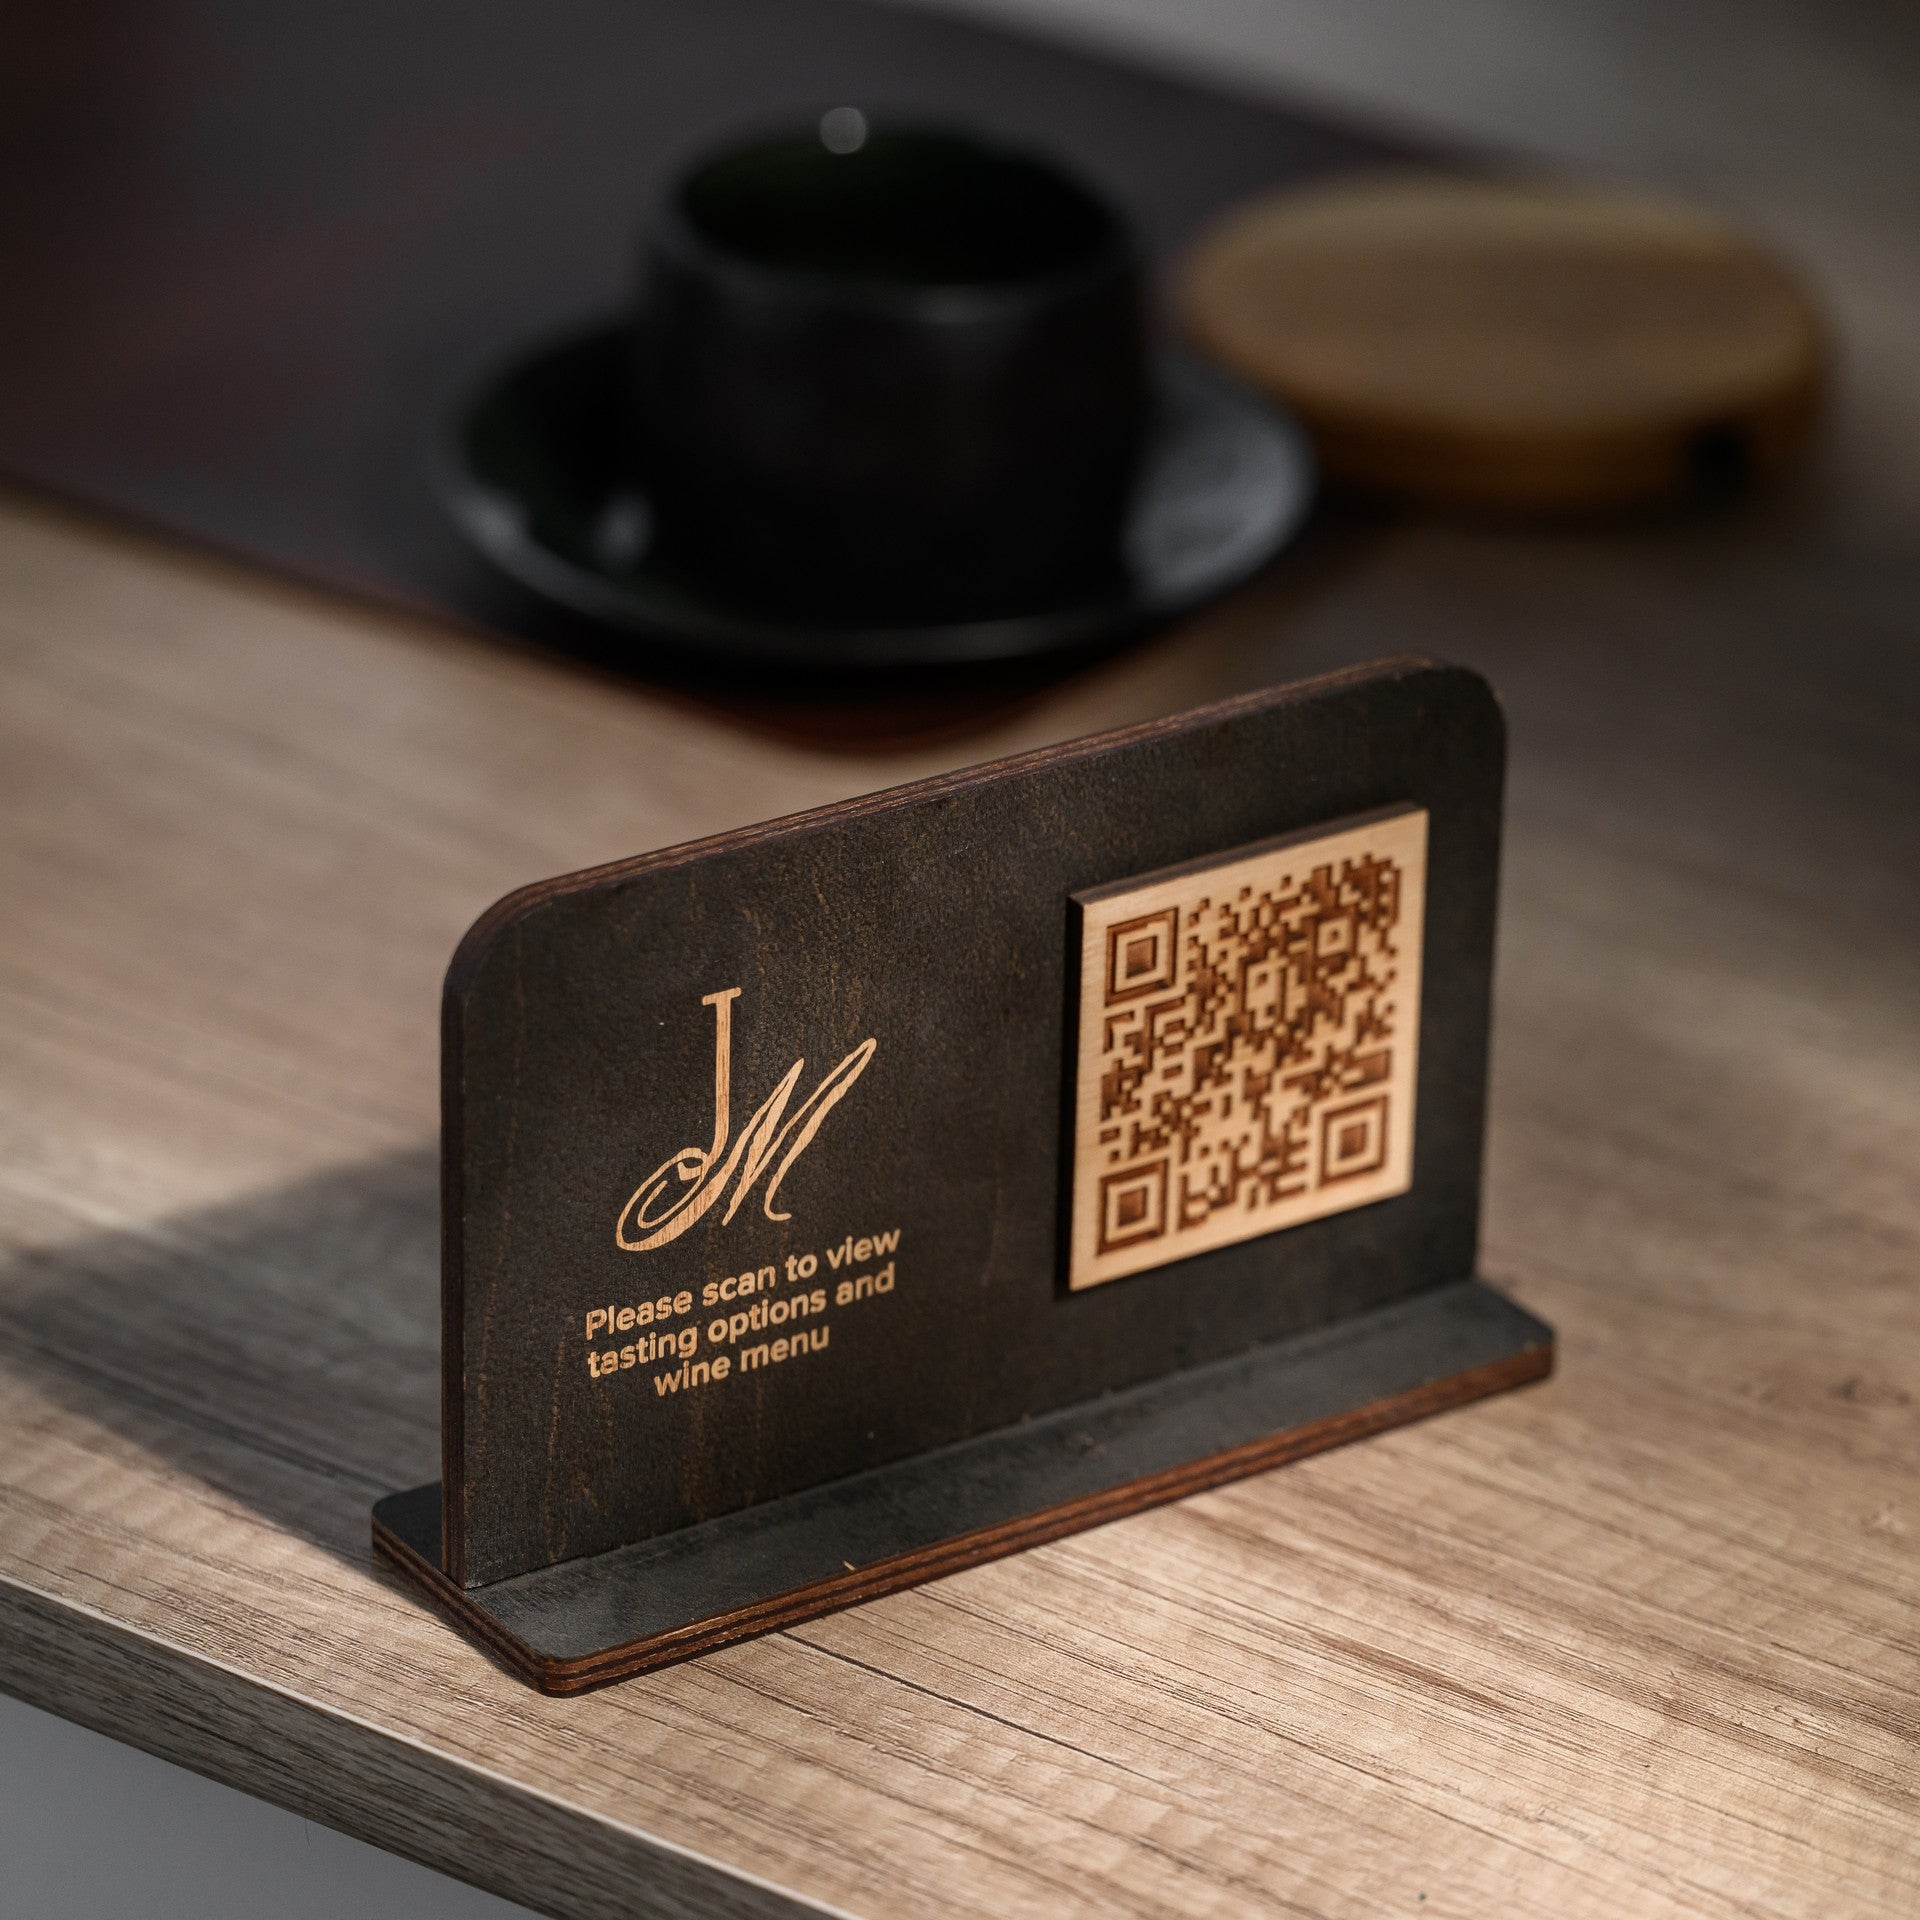 Desktop QR Code Sign for seamless scanning. Perfect for bar menu displays, ensuring a hygienic and touchless dining experience.